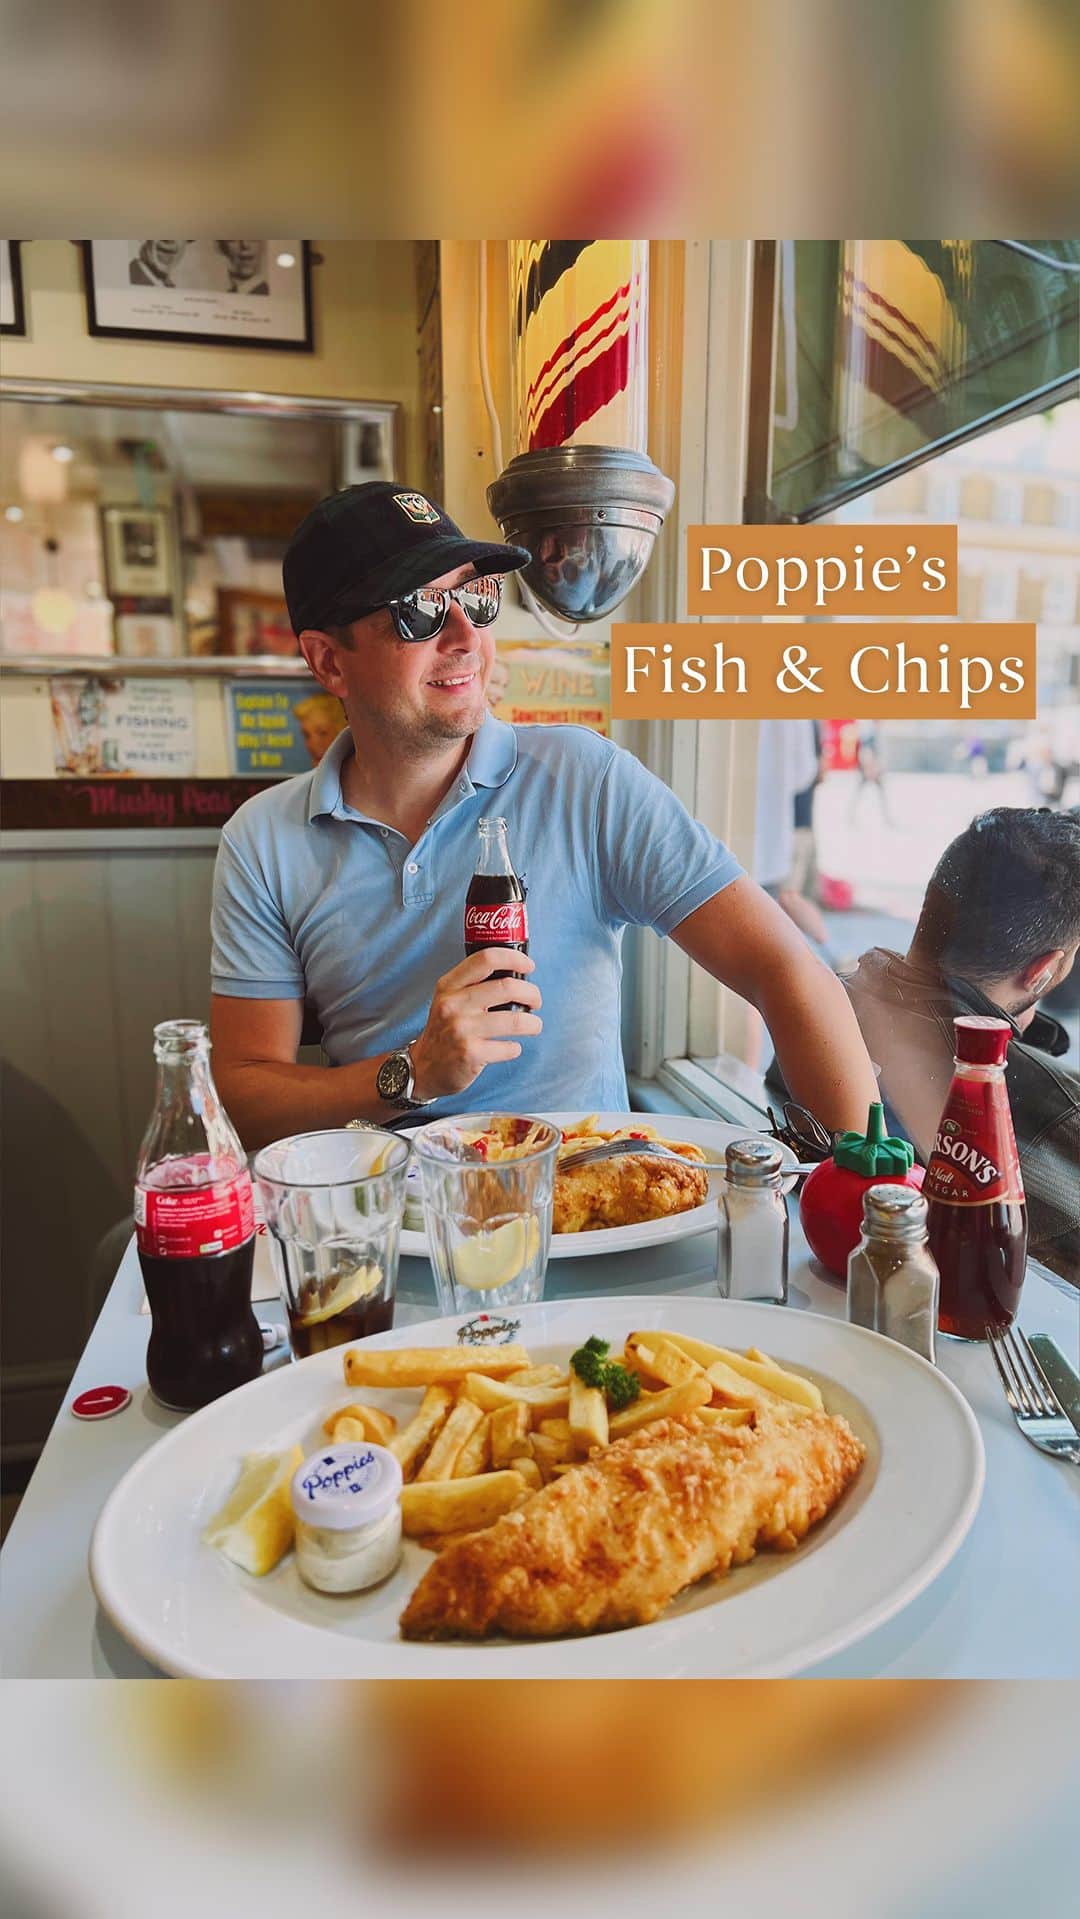 @LONDON | TAG #THISISLONDONのインスタグラム：「🍽️ @MrLondon visiting an institutional #FishAndChips 🐟🍟 with @alice.sampo - it is of course @PopsFishNChips in #Shoreditch, close to #BrickLane. If you’re looking for a classic, look no further. 👍🏼👍🏼  ___________________________________________ #thisislondon #lovelondon #london #londra #londonlife #londres #uk #visitlondon #british #🇬🇧 #foodiesoflondon #londonfoodies #londonfoodie #londonfood #londonrestaurants #londonbars #londonreviewed」